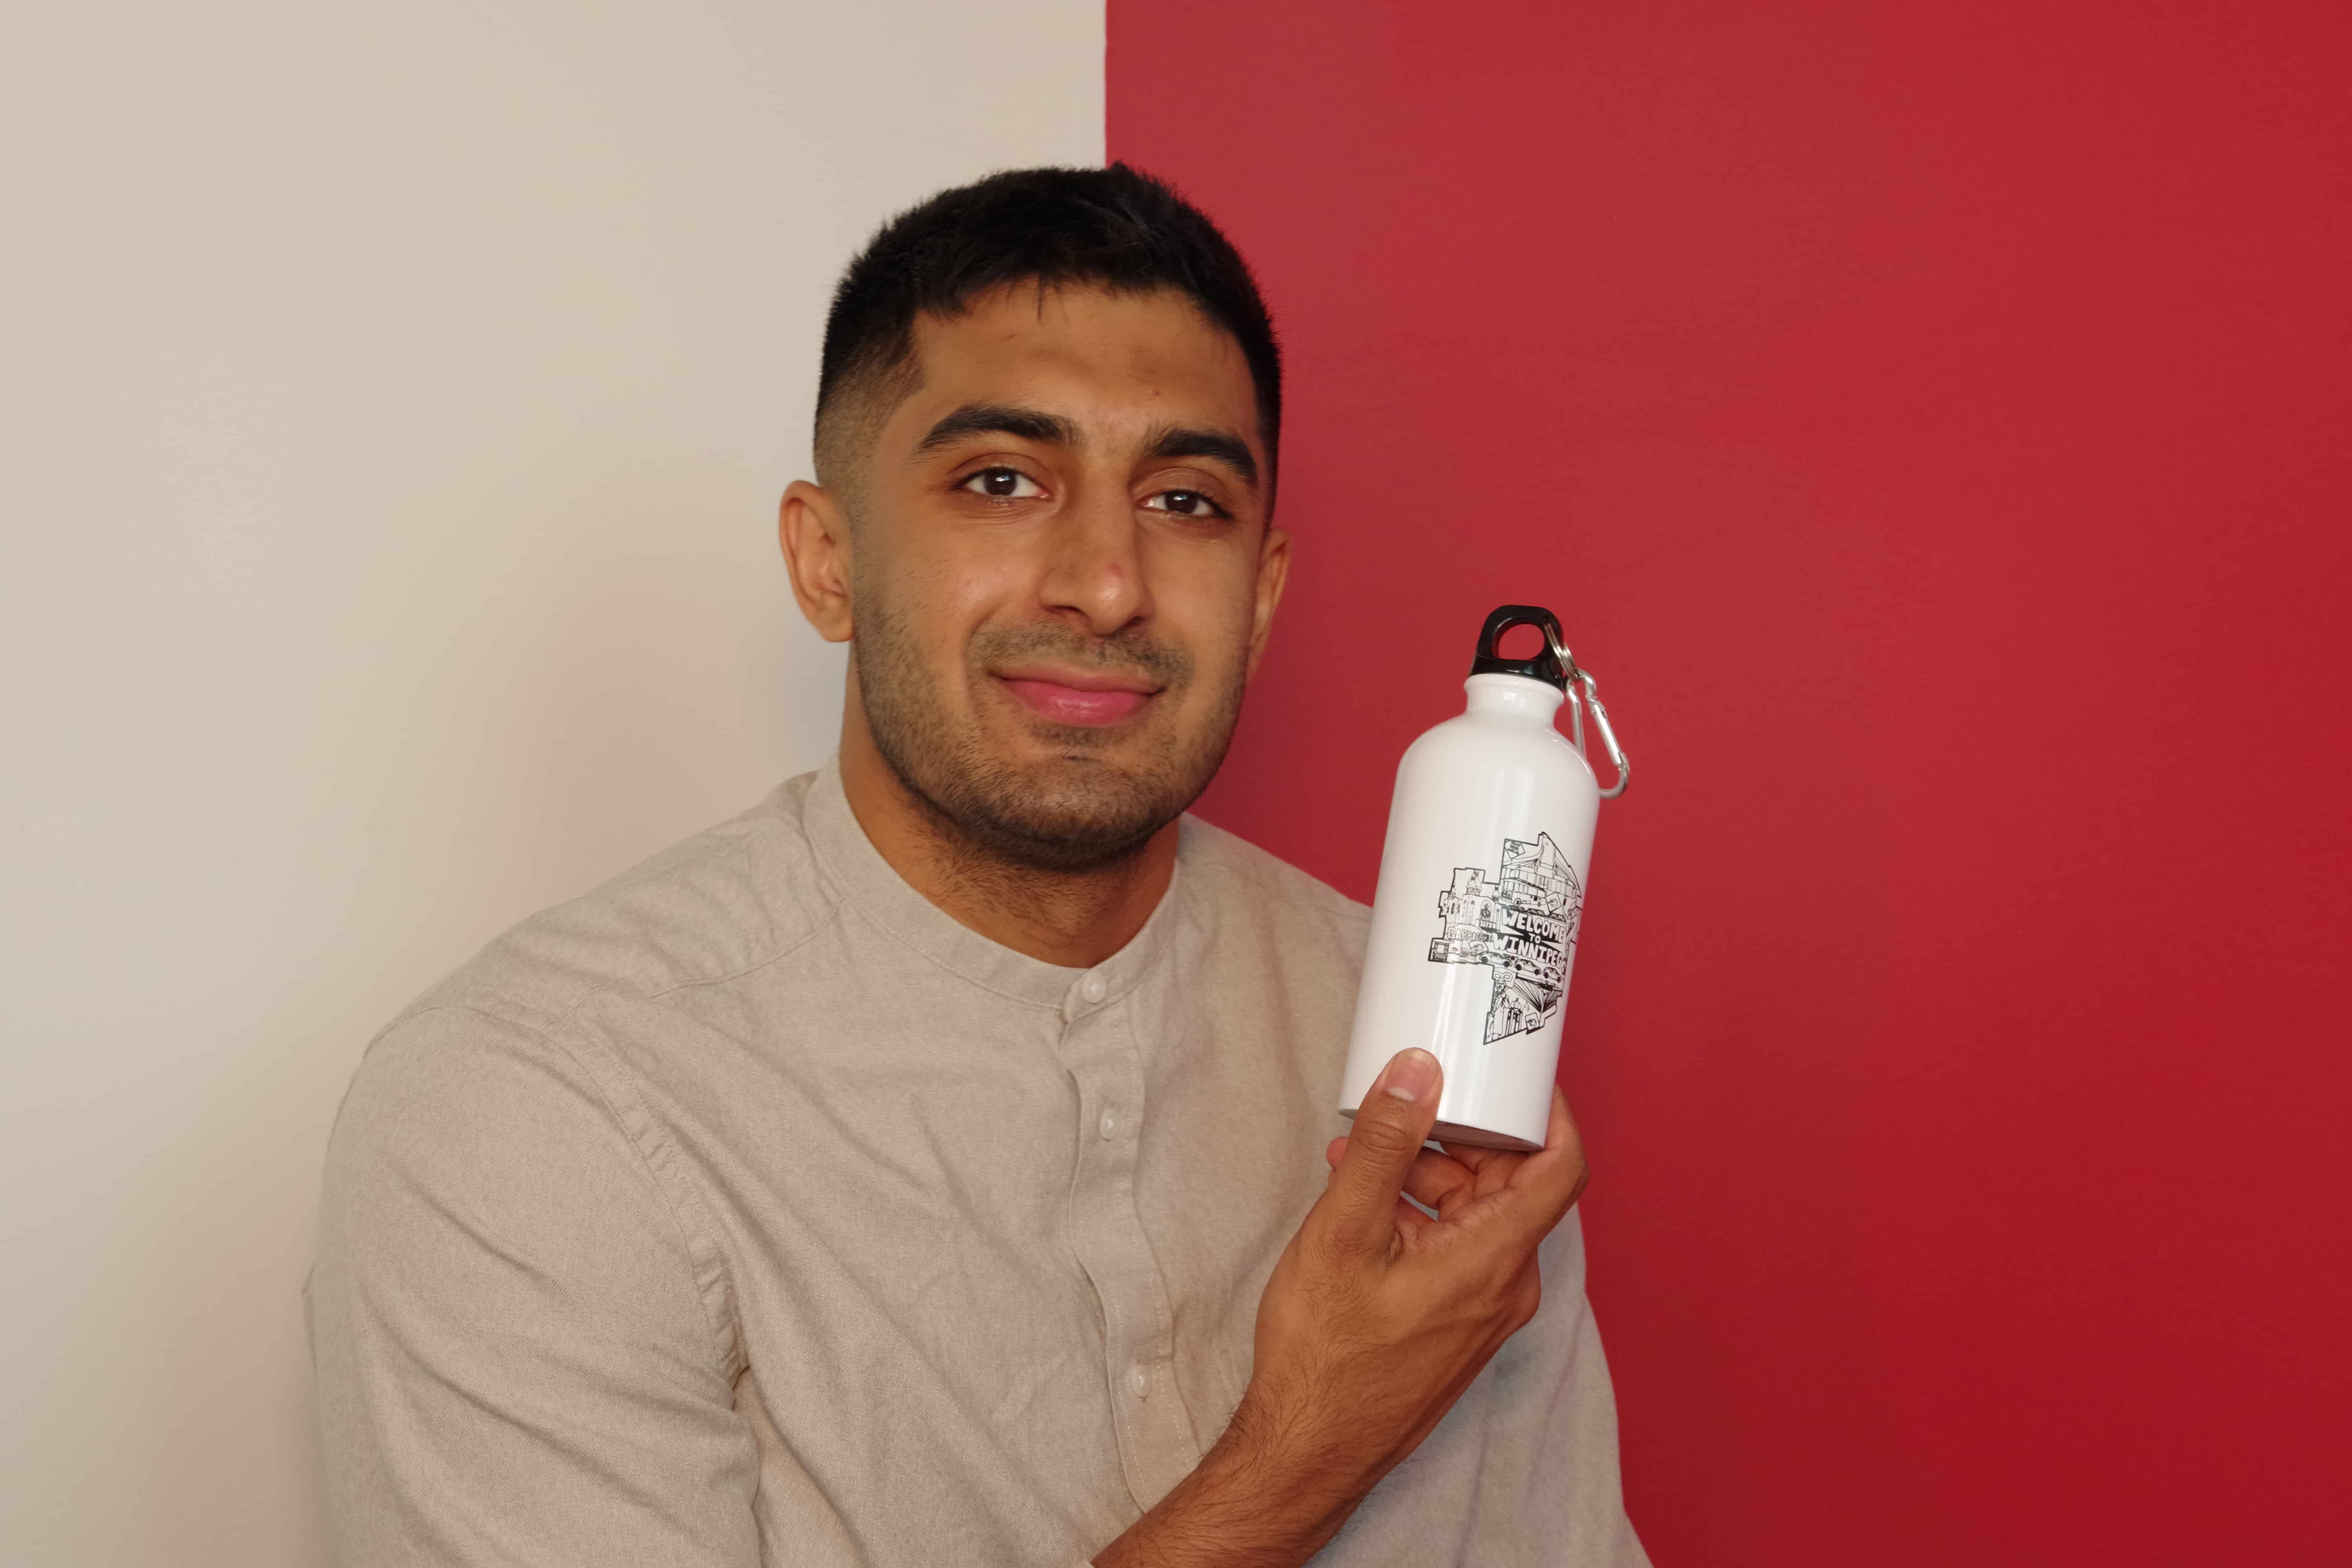 Main Street Project marketing coordinator, Raj Sidhu holding a water bottle donated to their shelter program.